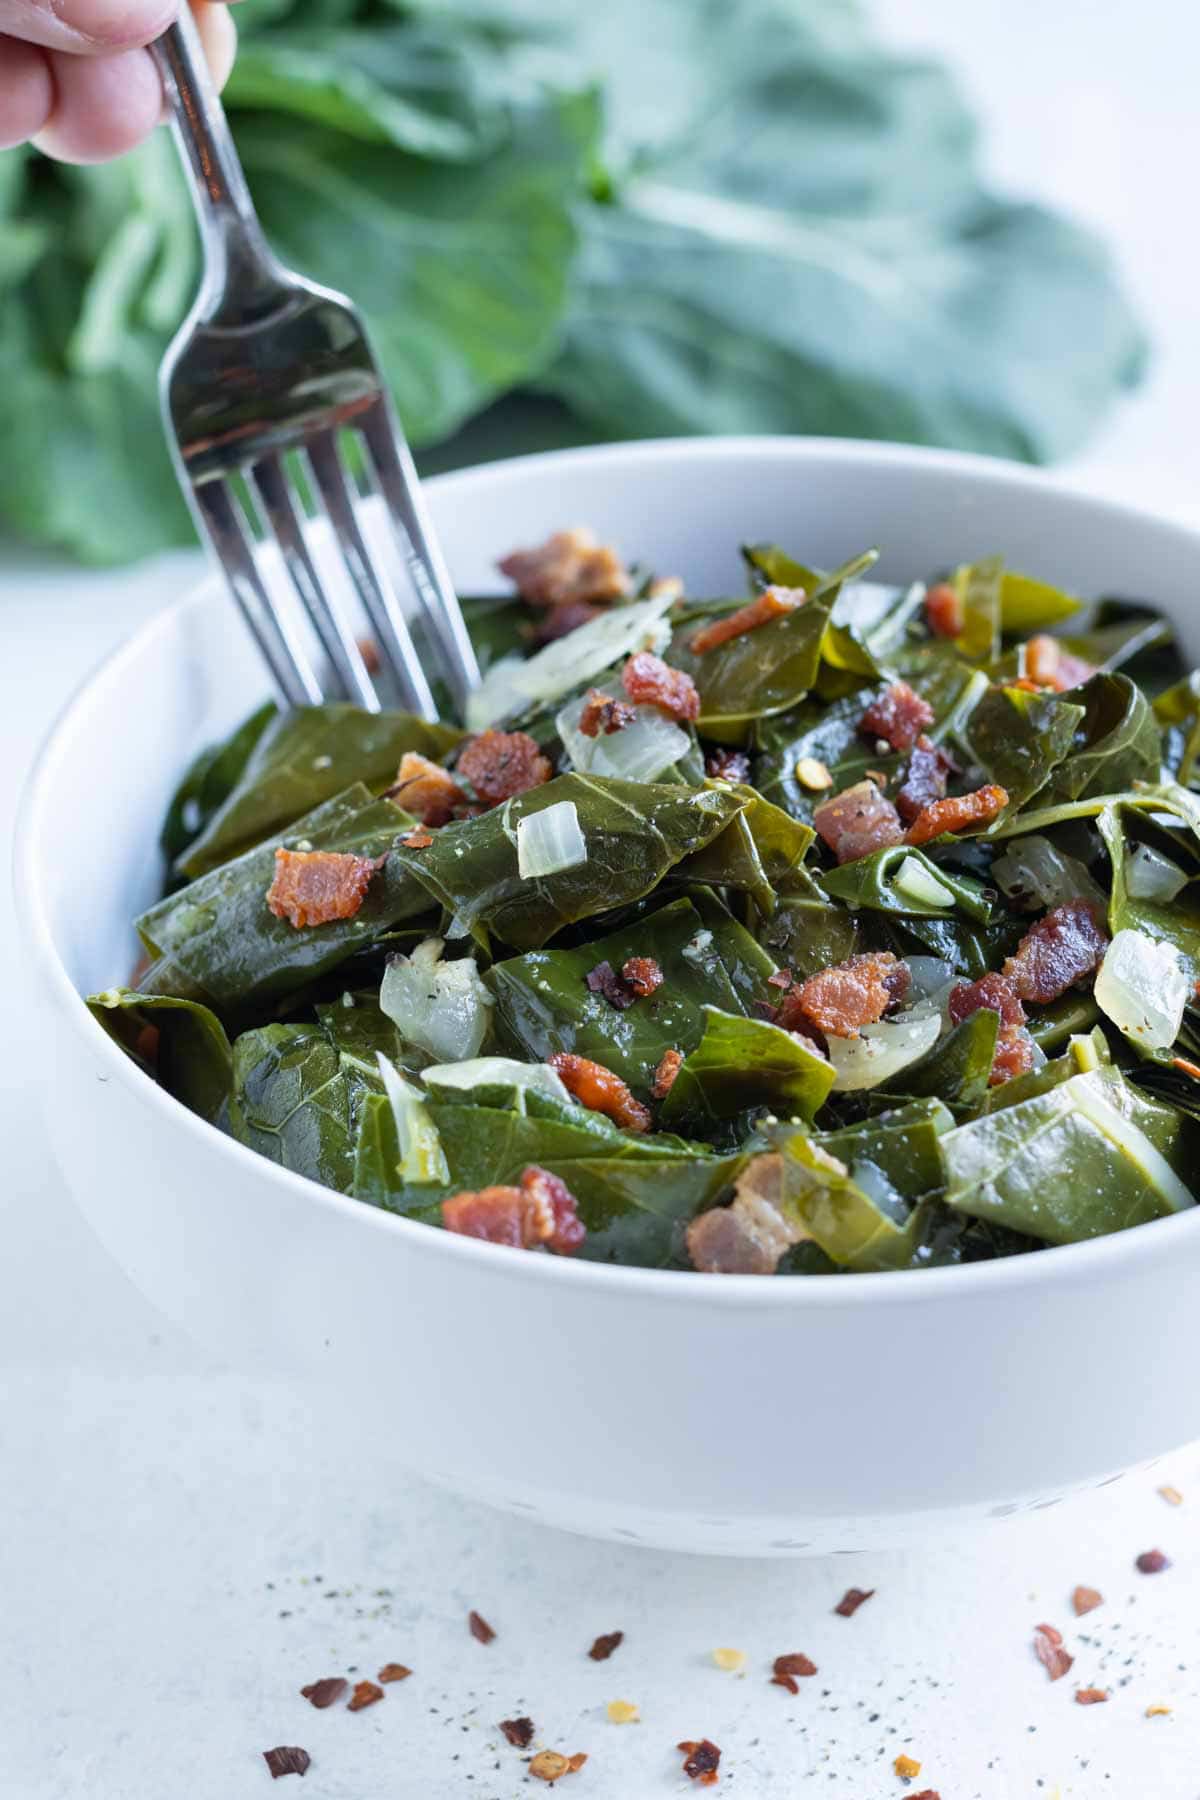 A fork is shown eating collard greens.